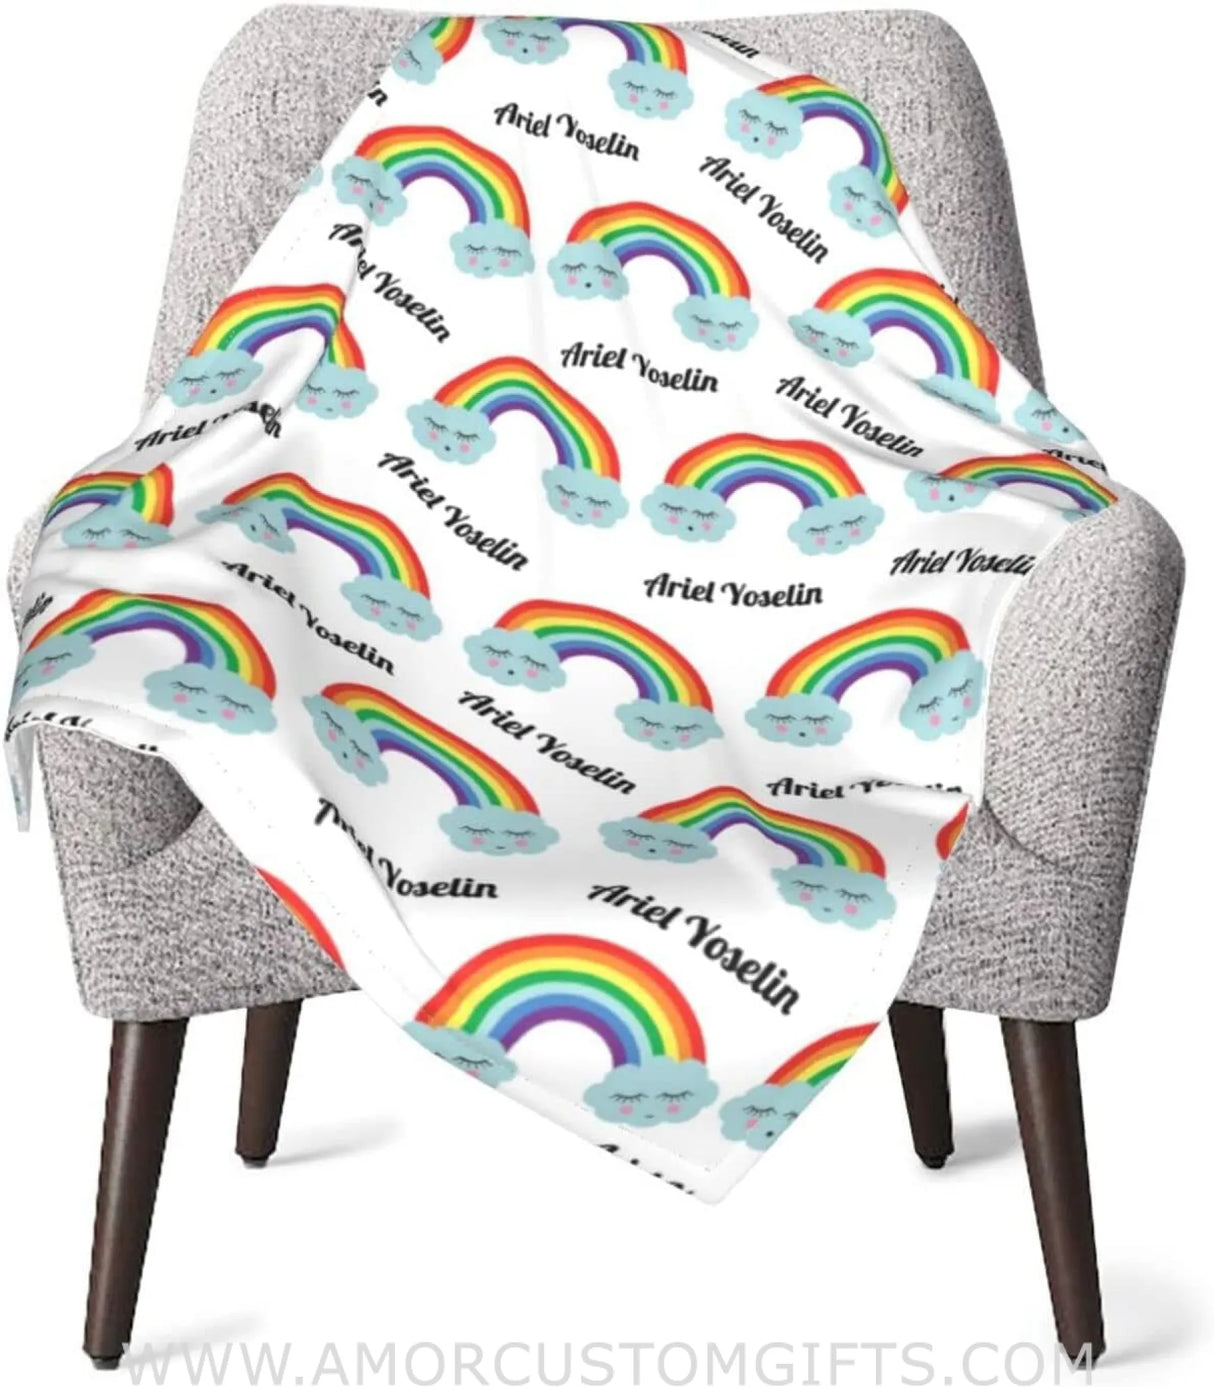 Blankets USA MADE Personalized Baby Blankets for Boys with Name, Customized Rainbow Baby Boys Blanket with Name